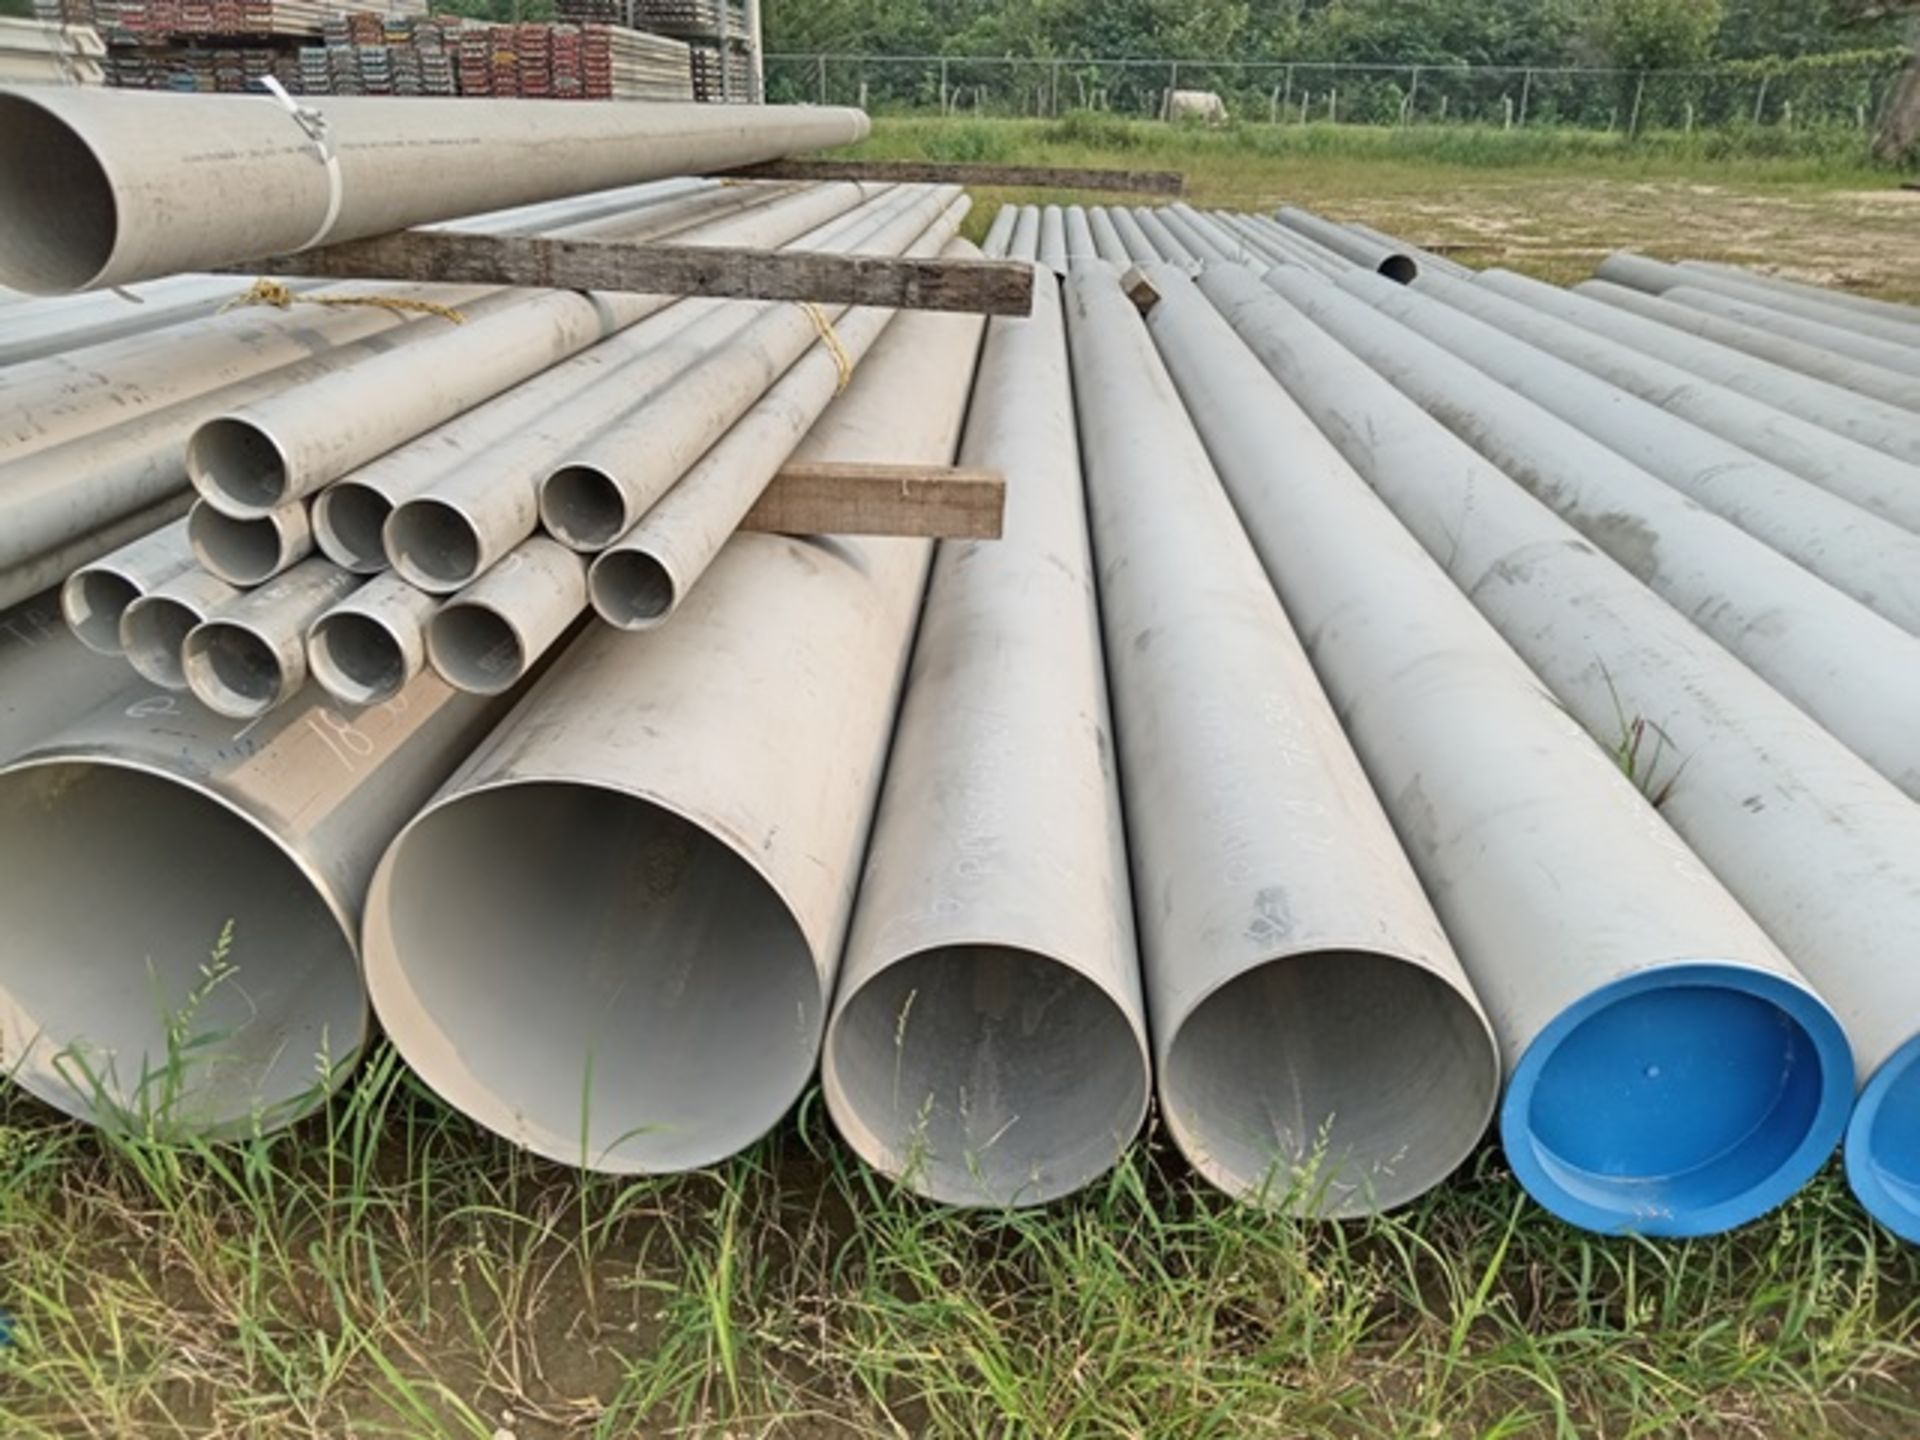 LOT OF APPROXIMATELY 133 METERS OF T-304 AND T-316 STAINLESS STEEL PIPE - Image 4 of 6